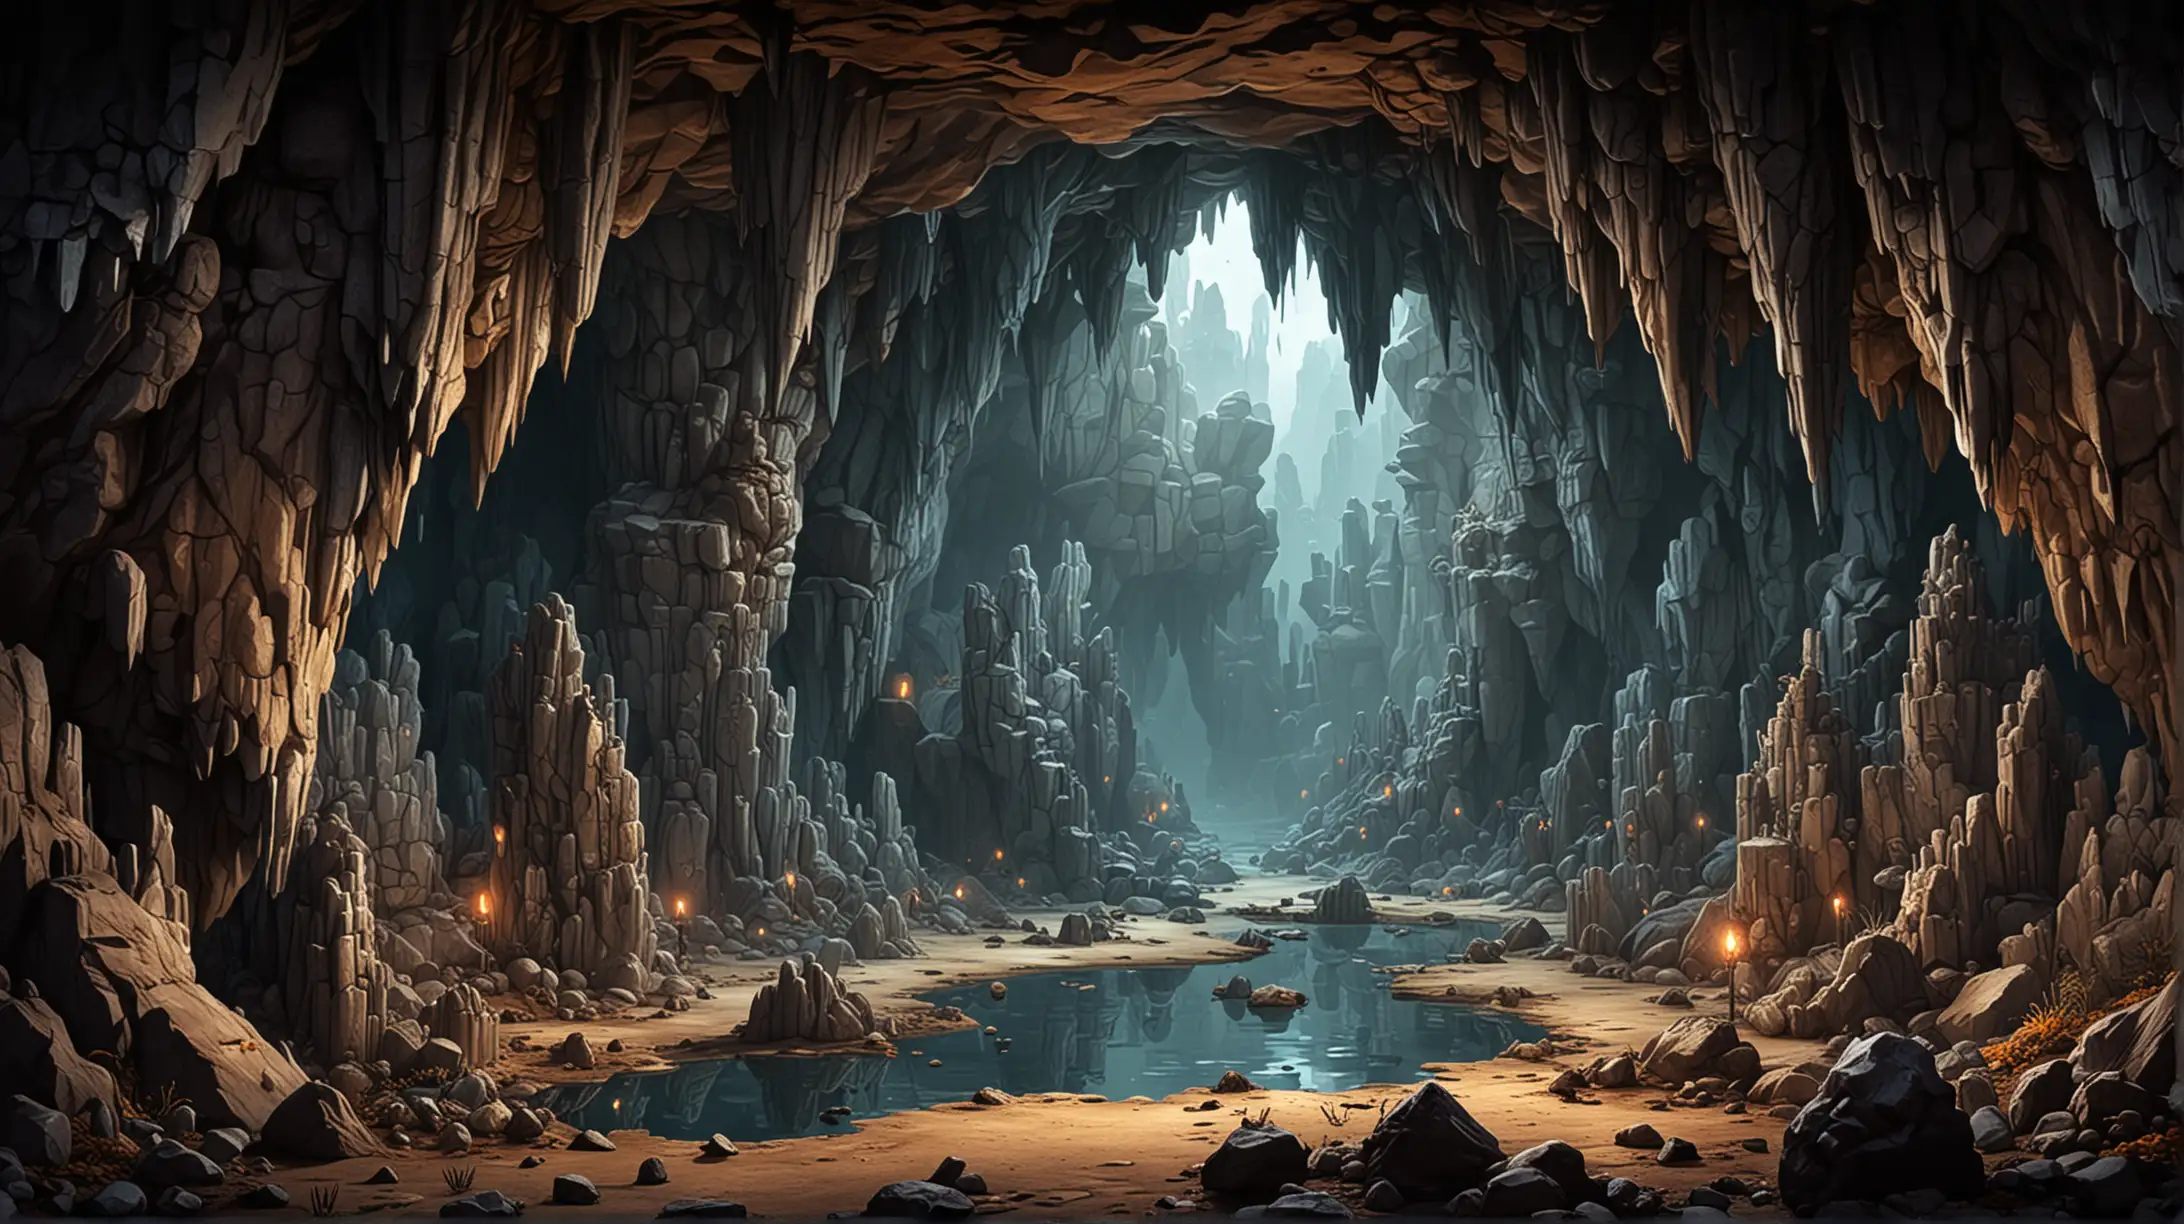 Enchanting Cave Adventure with Stalactites and Stalagmites